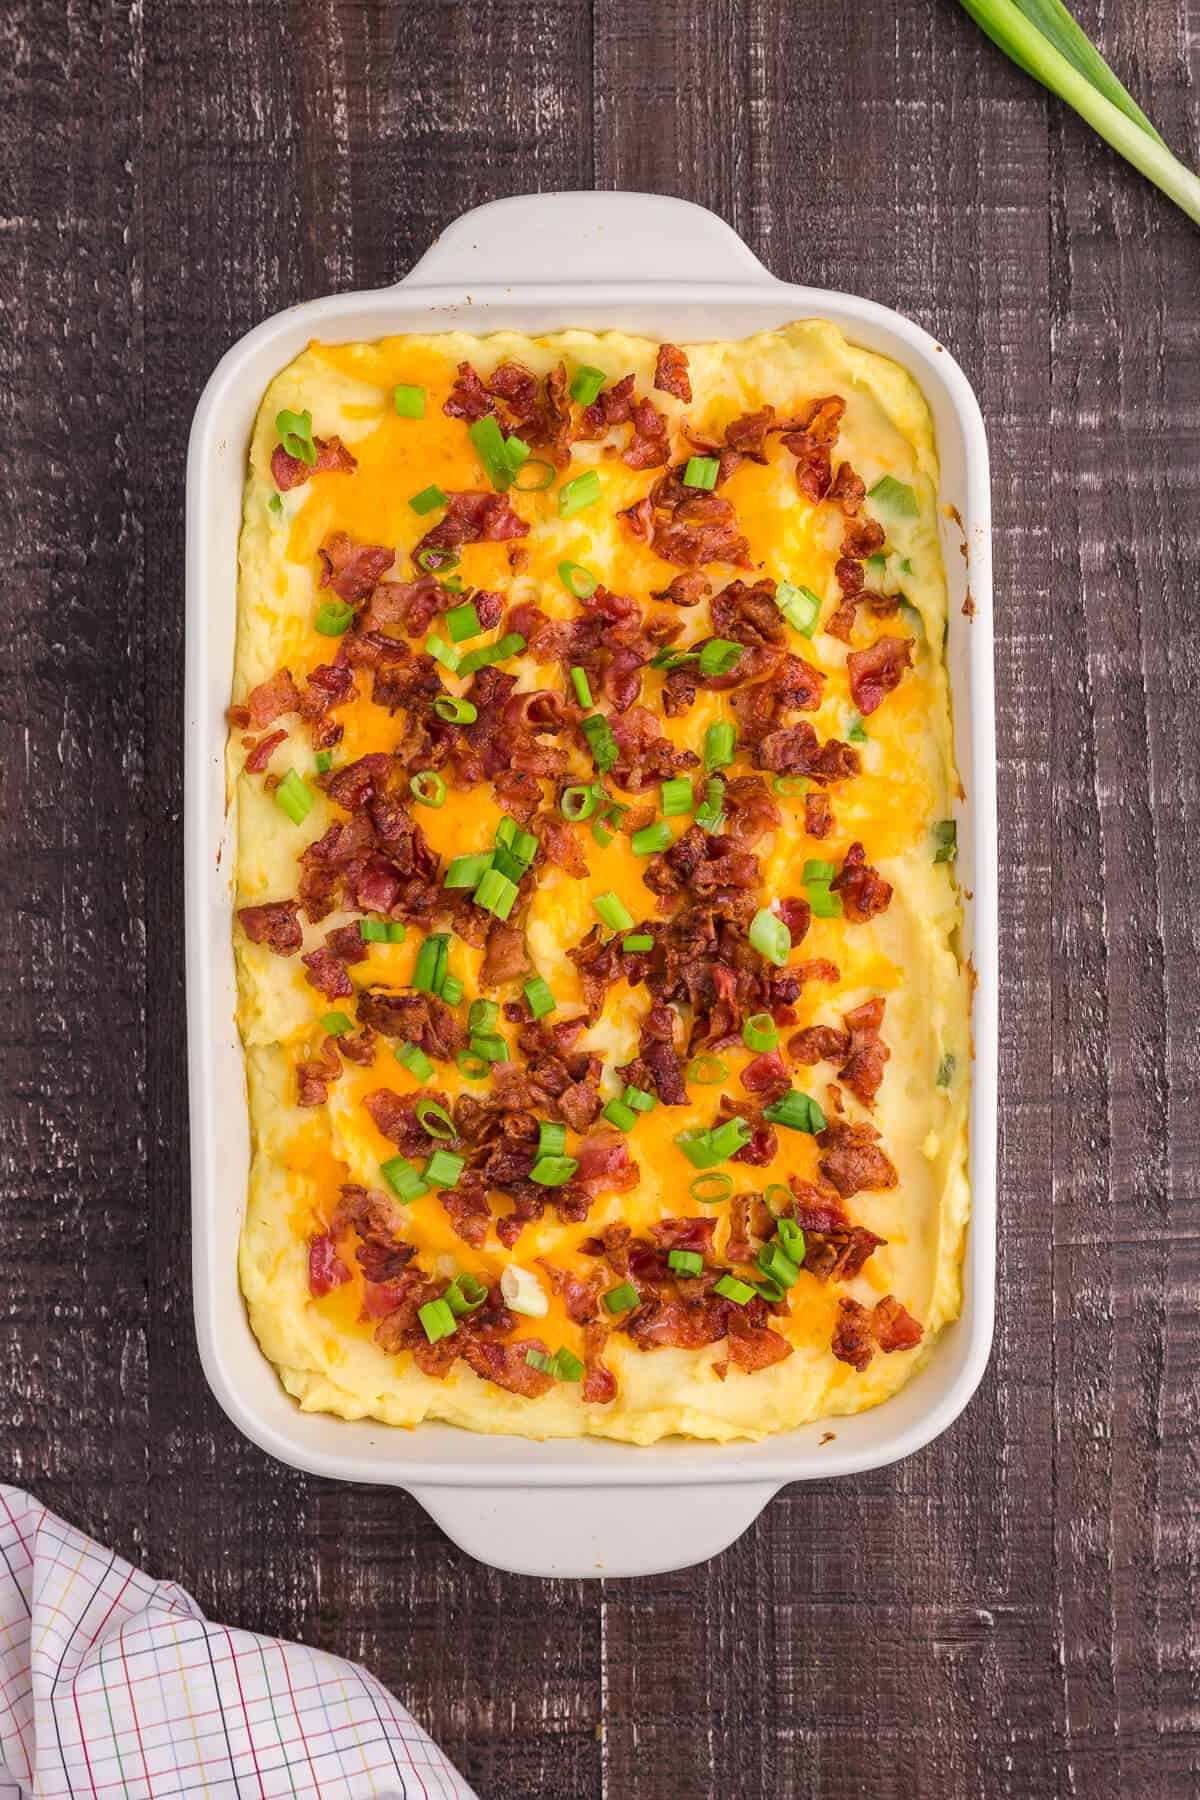 loaded mashed potatoes in a casserole dish